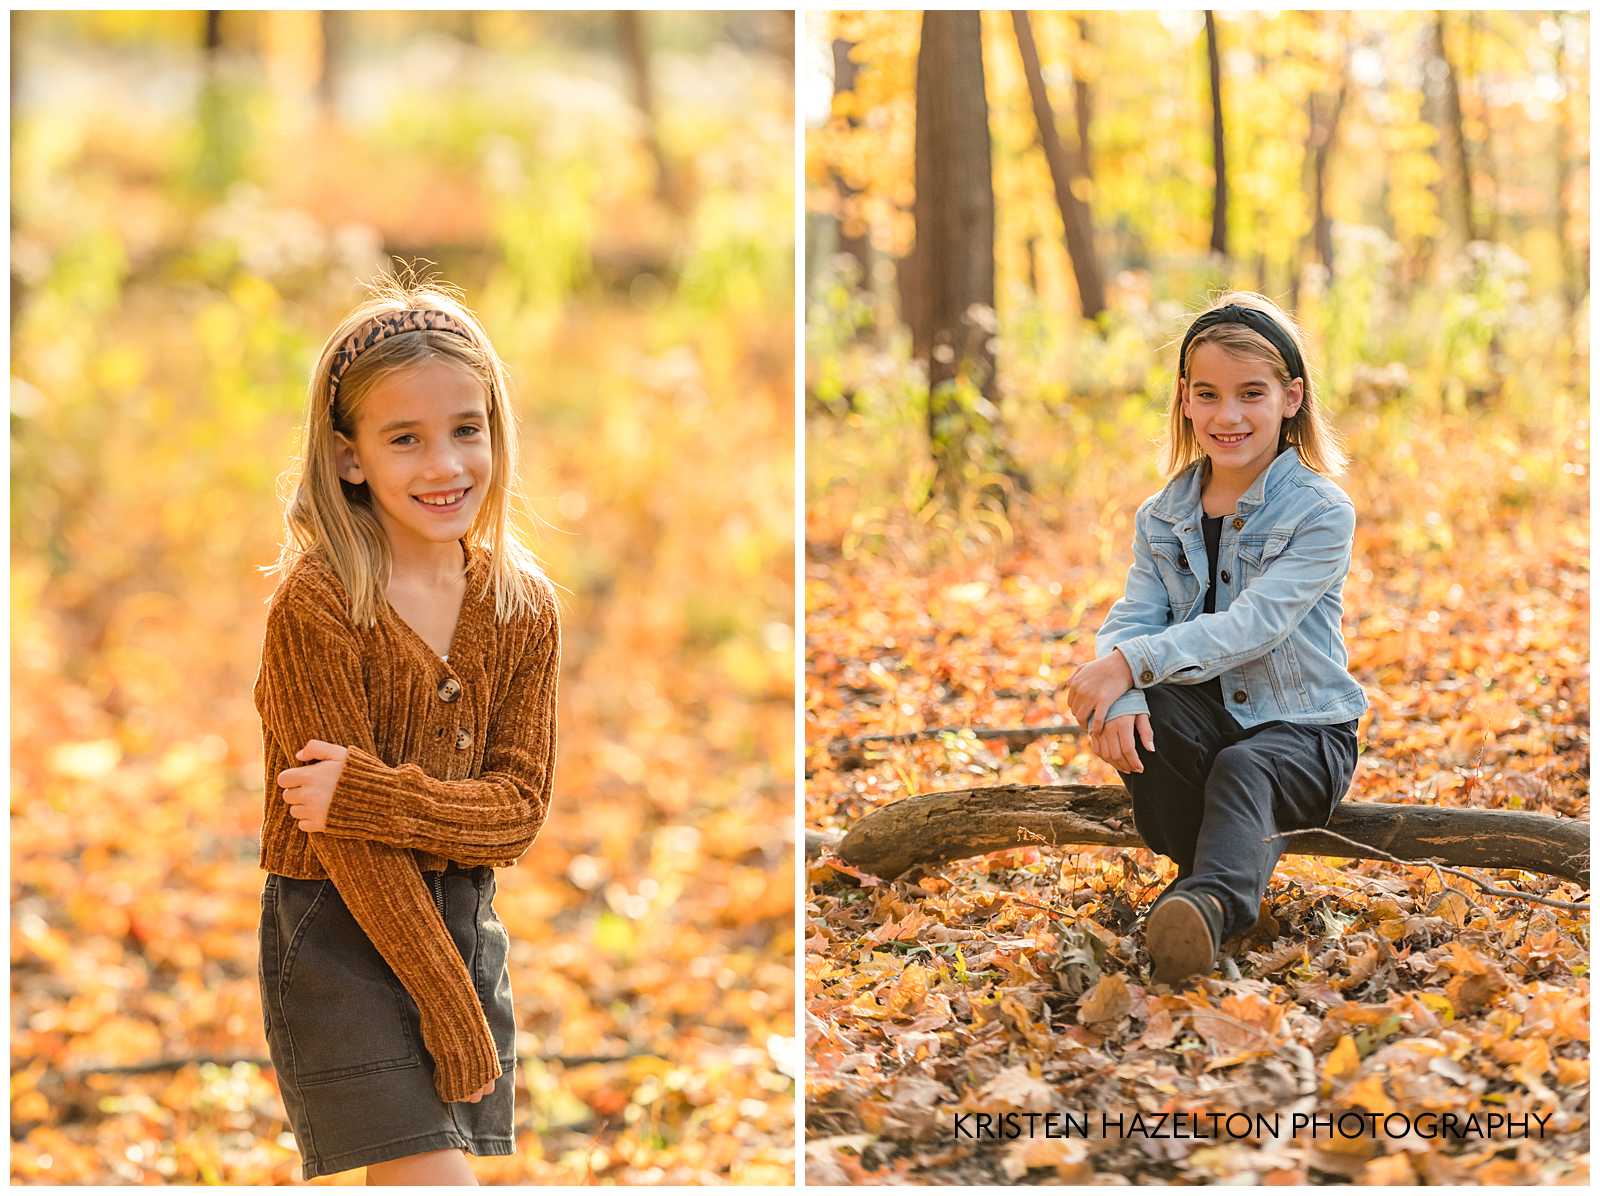 Two young sisters in the fall woods